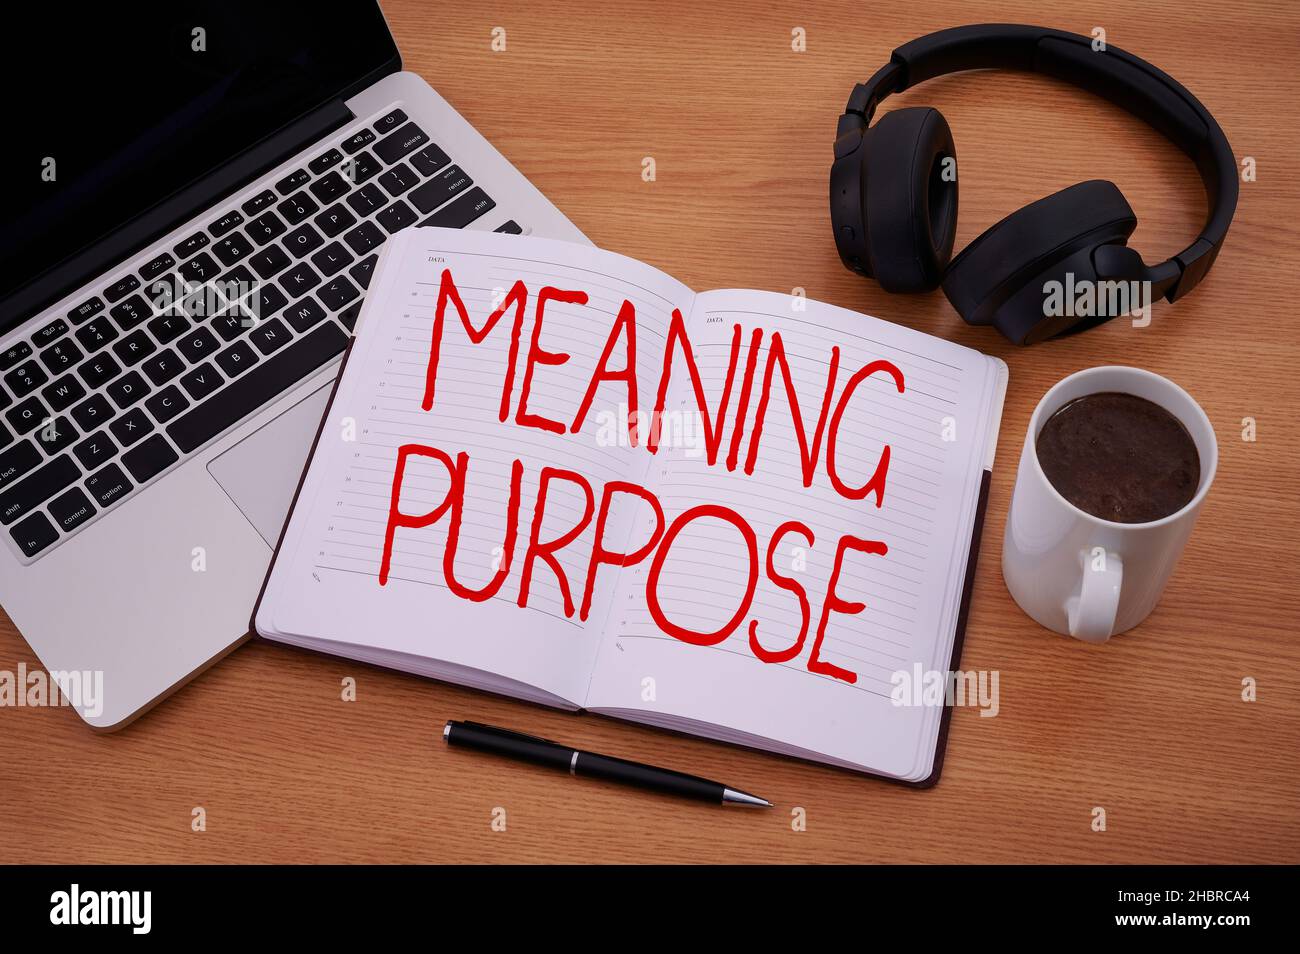 Hand writing sign Meaning Purpose. Word Written on The reason for which something is done or created and exists Blank Notepad Laptop With Pen And Stock Photo